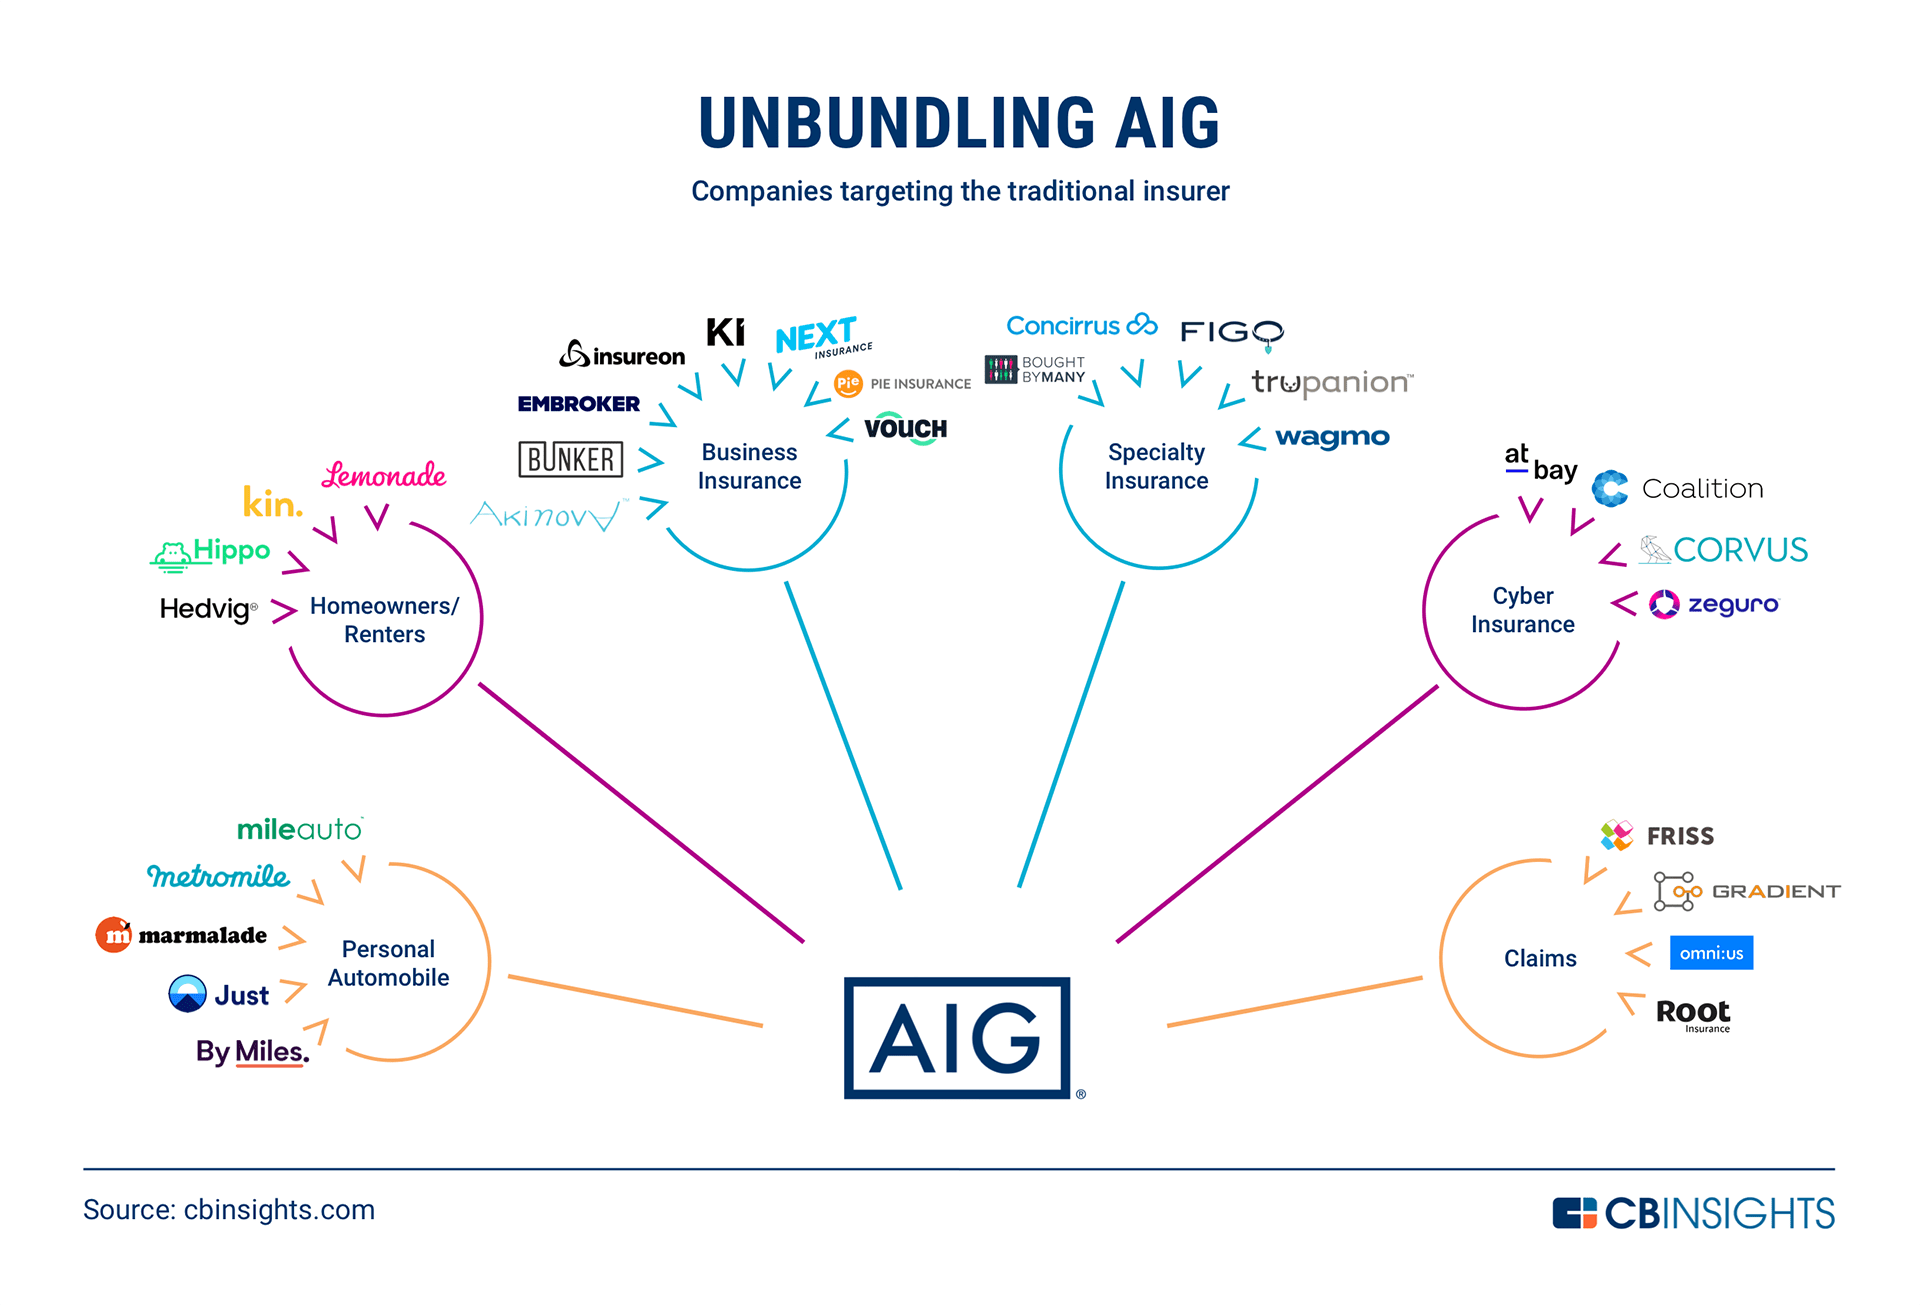 Unbundling AIG: How The Traditional P&C Insurer Is Being Disrupted